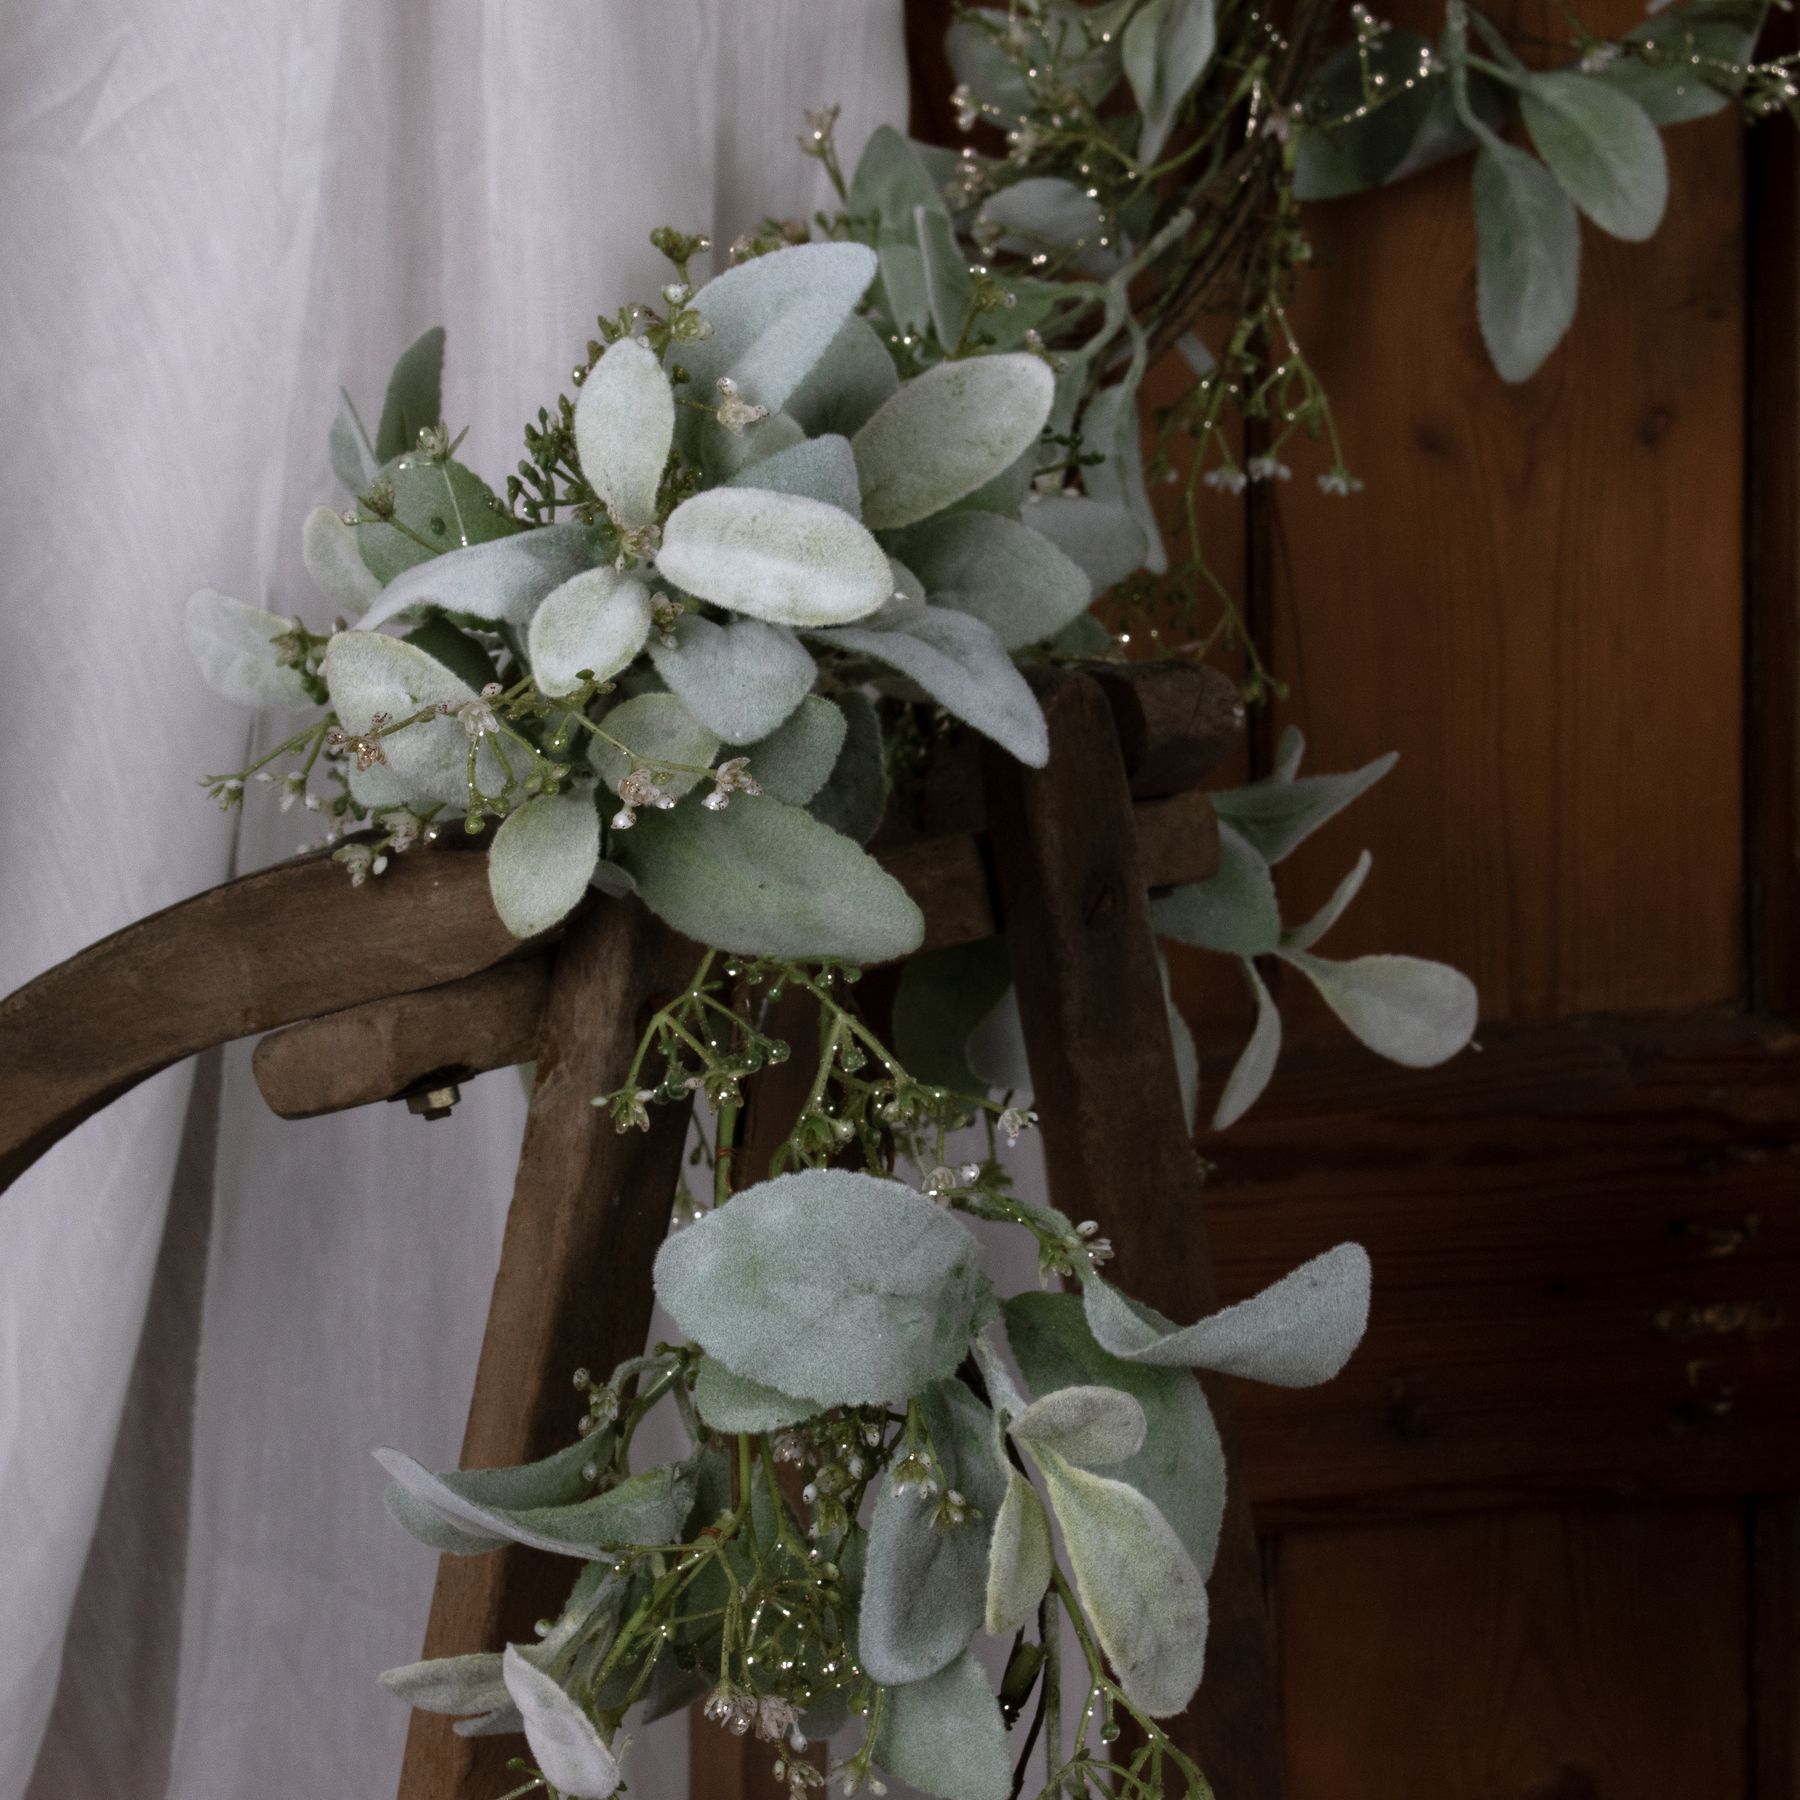 Winter Garland With Lambs Ear And Wax Flower - Image 4